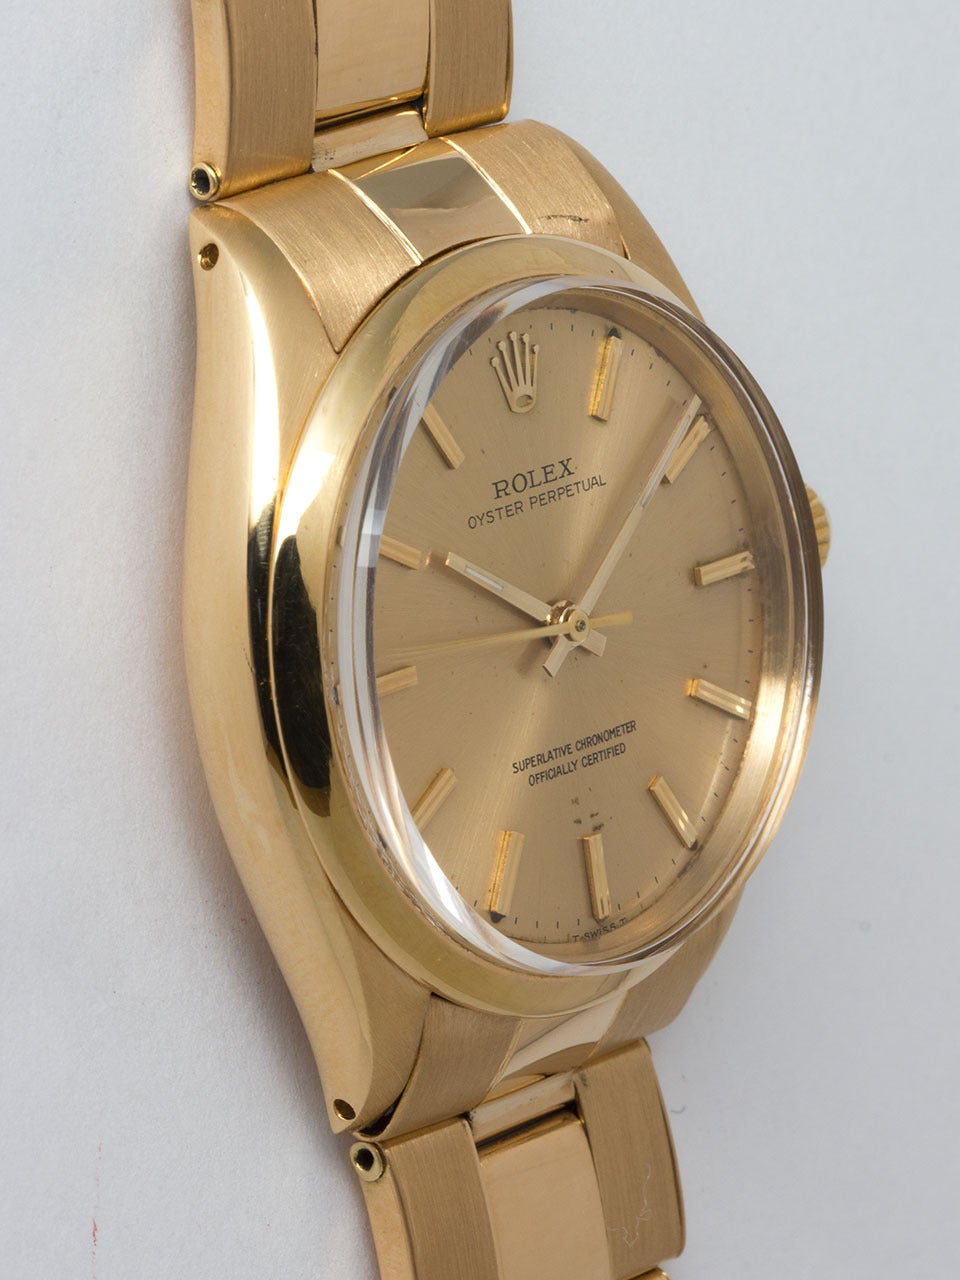 Rolex 18K Yellow Gold Oyster Perpetual ref 1005 circa 1966. 34m diameter case with smooth bezel and acrylic crystal. Original champagne dial with gold applied indexes and baton hands. Powered by  movement. With Rolex signed 18K yellow gold riveted